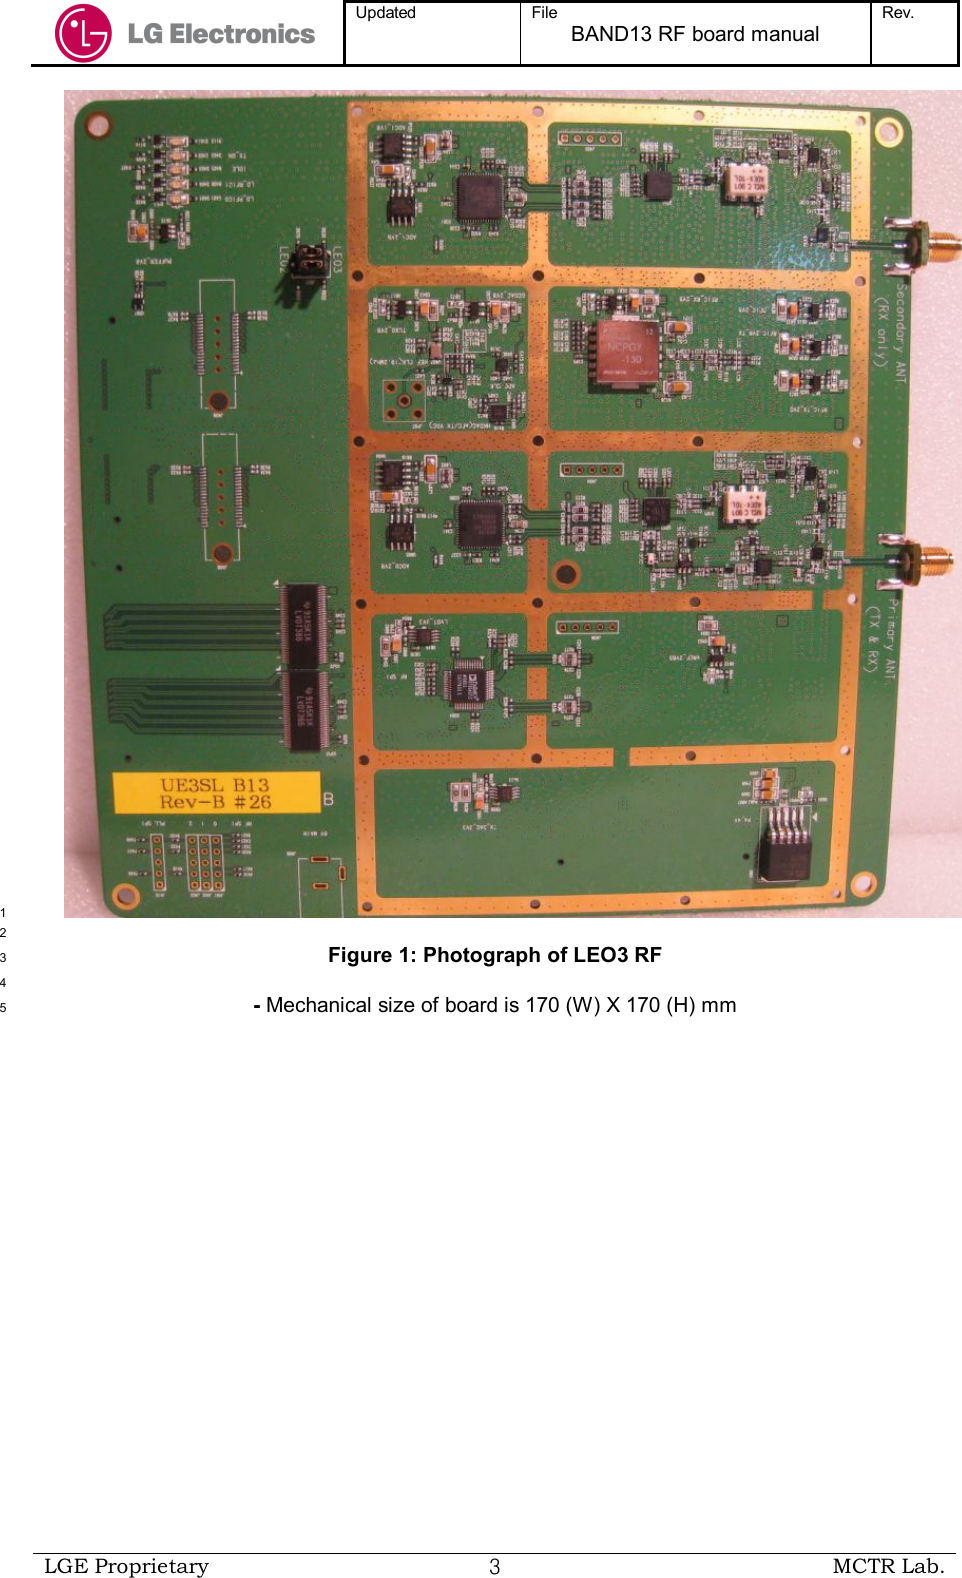  Updated  File BAND13 RF board manual Rev.    LGE Proprietary  ３ MCTR Lab.   1  2 Figure 1: Photograph of LEO3 RF 3  4 - Mechanical size of board is 170 (W) X 170 (H) mm5 